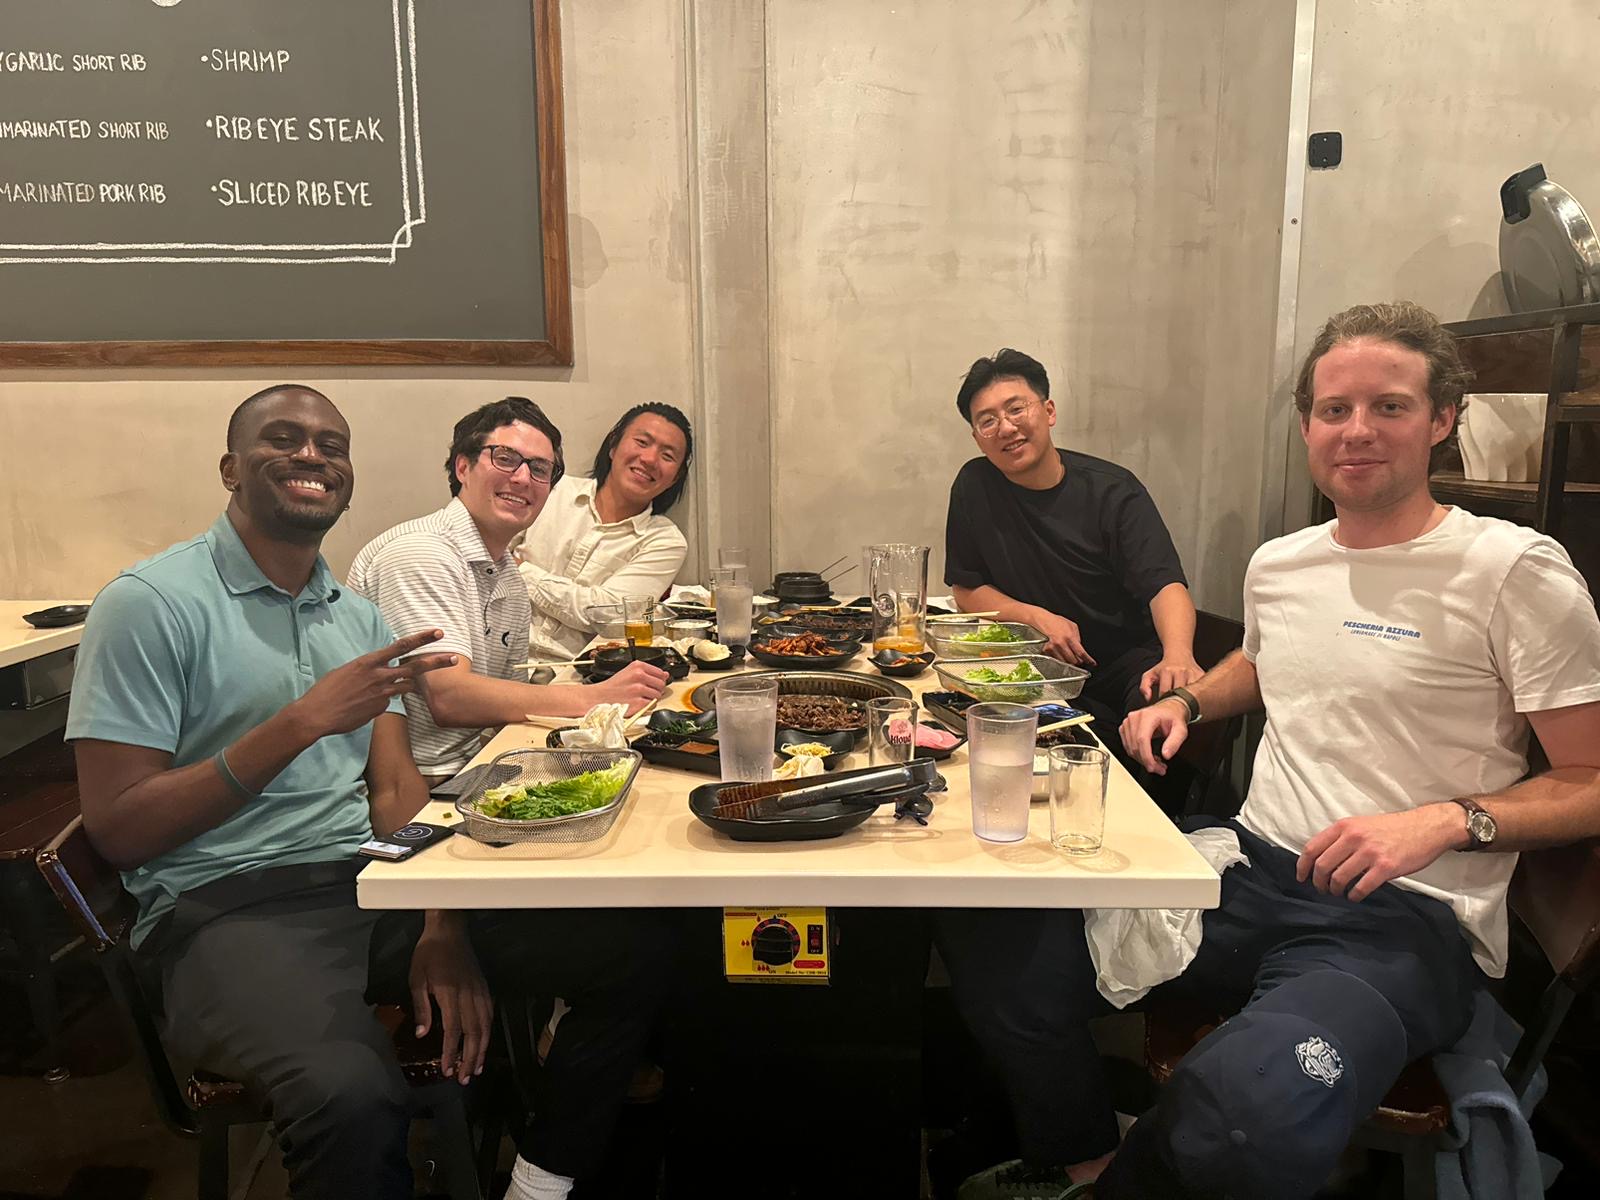 Scheiner and his classmates had dinner together after completing their final presentation in their Economics of Climate Change course.